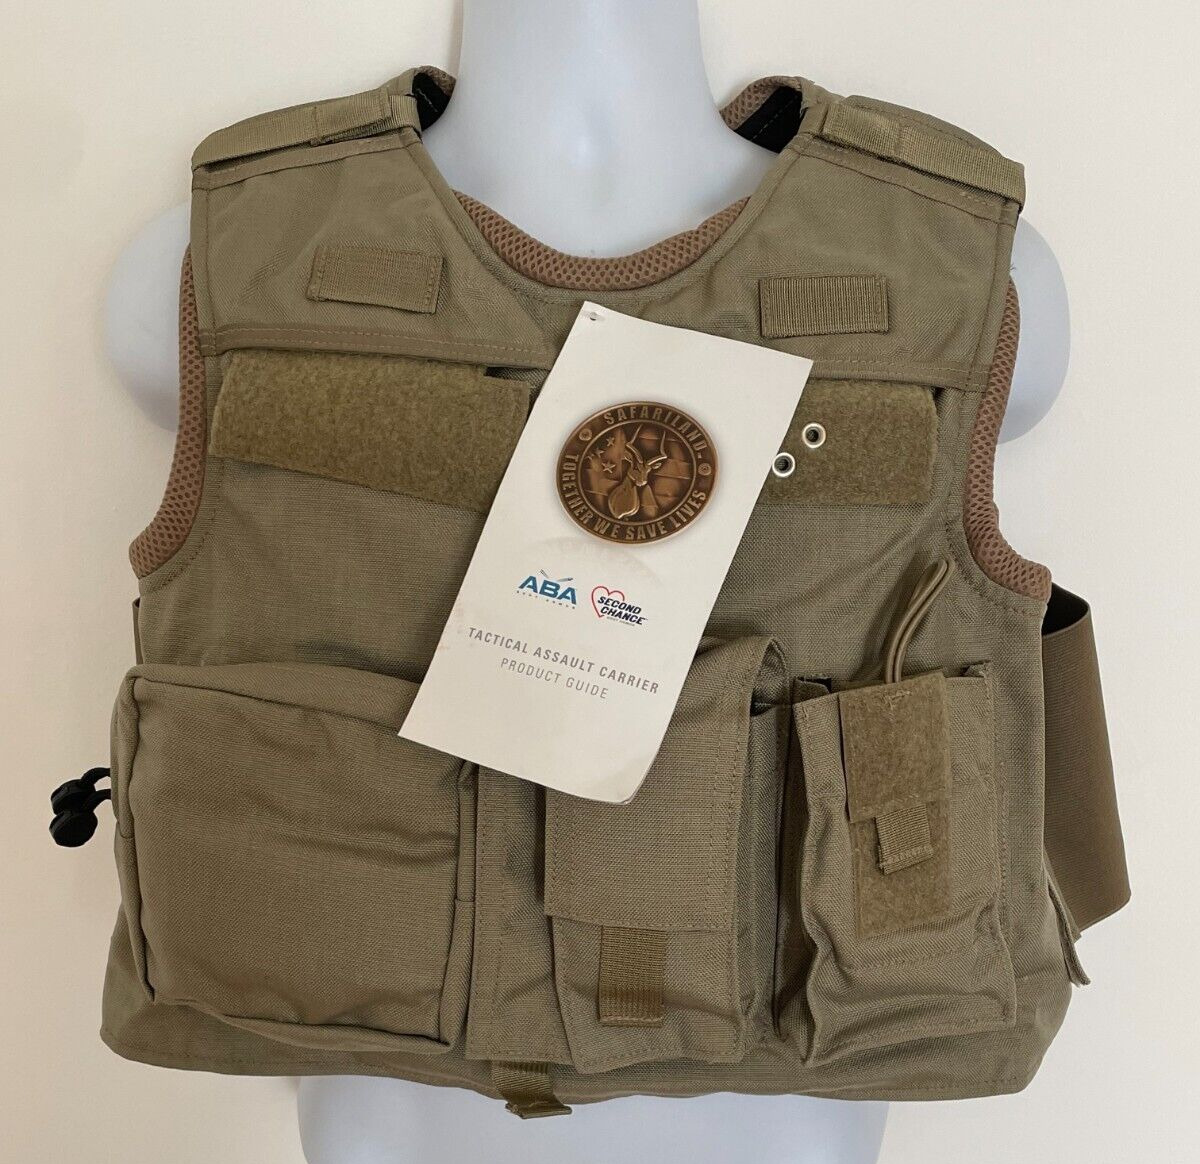 SECOND CHANCE Standard Fix Pocket Armor Carrier Side Open 2X-Large 2815-2512 Tan